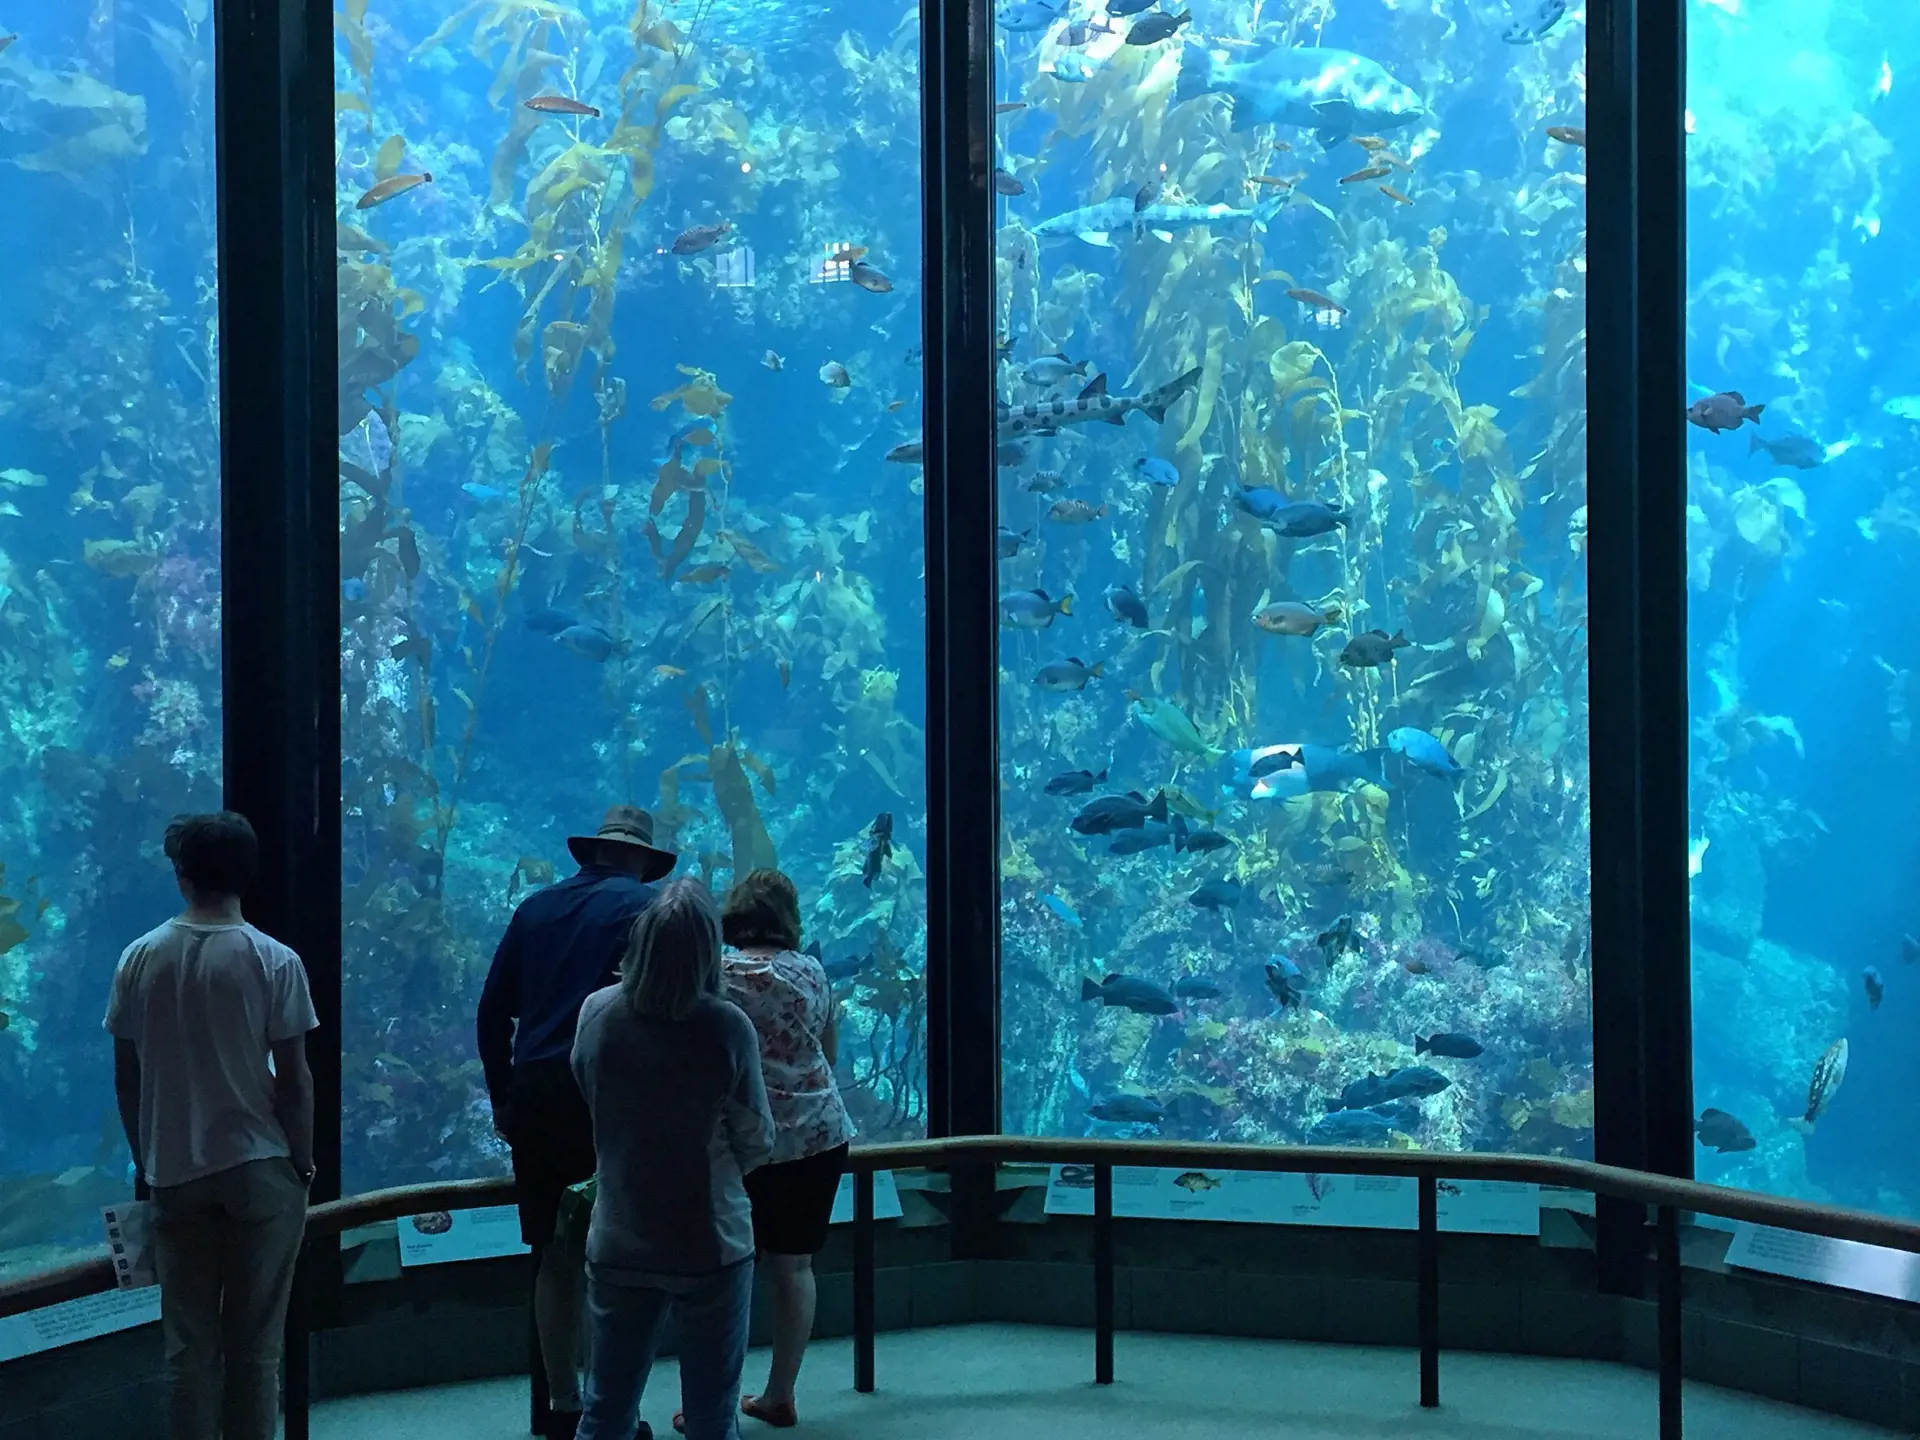 shutterstock_391699453 Visitors view fish in the Kelp Forest tank at The Monterey Bay Aquarium.jpg